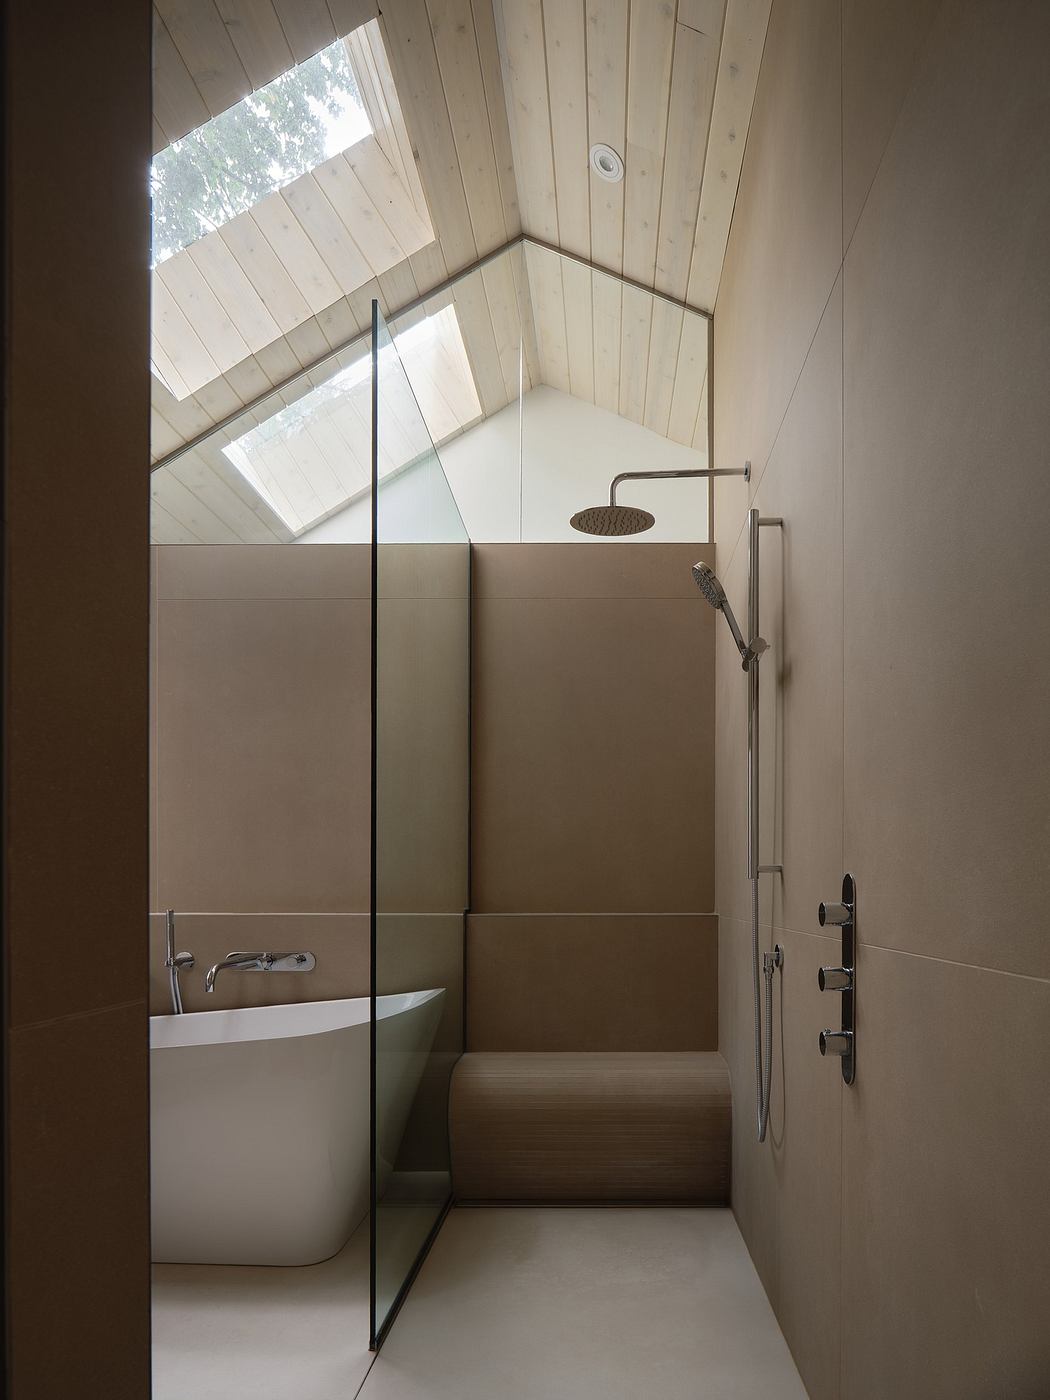 Modern bathroom with sloped ceiling, skylight, and neutral tones.